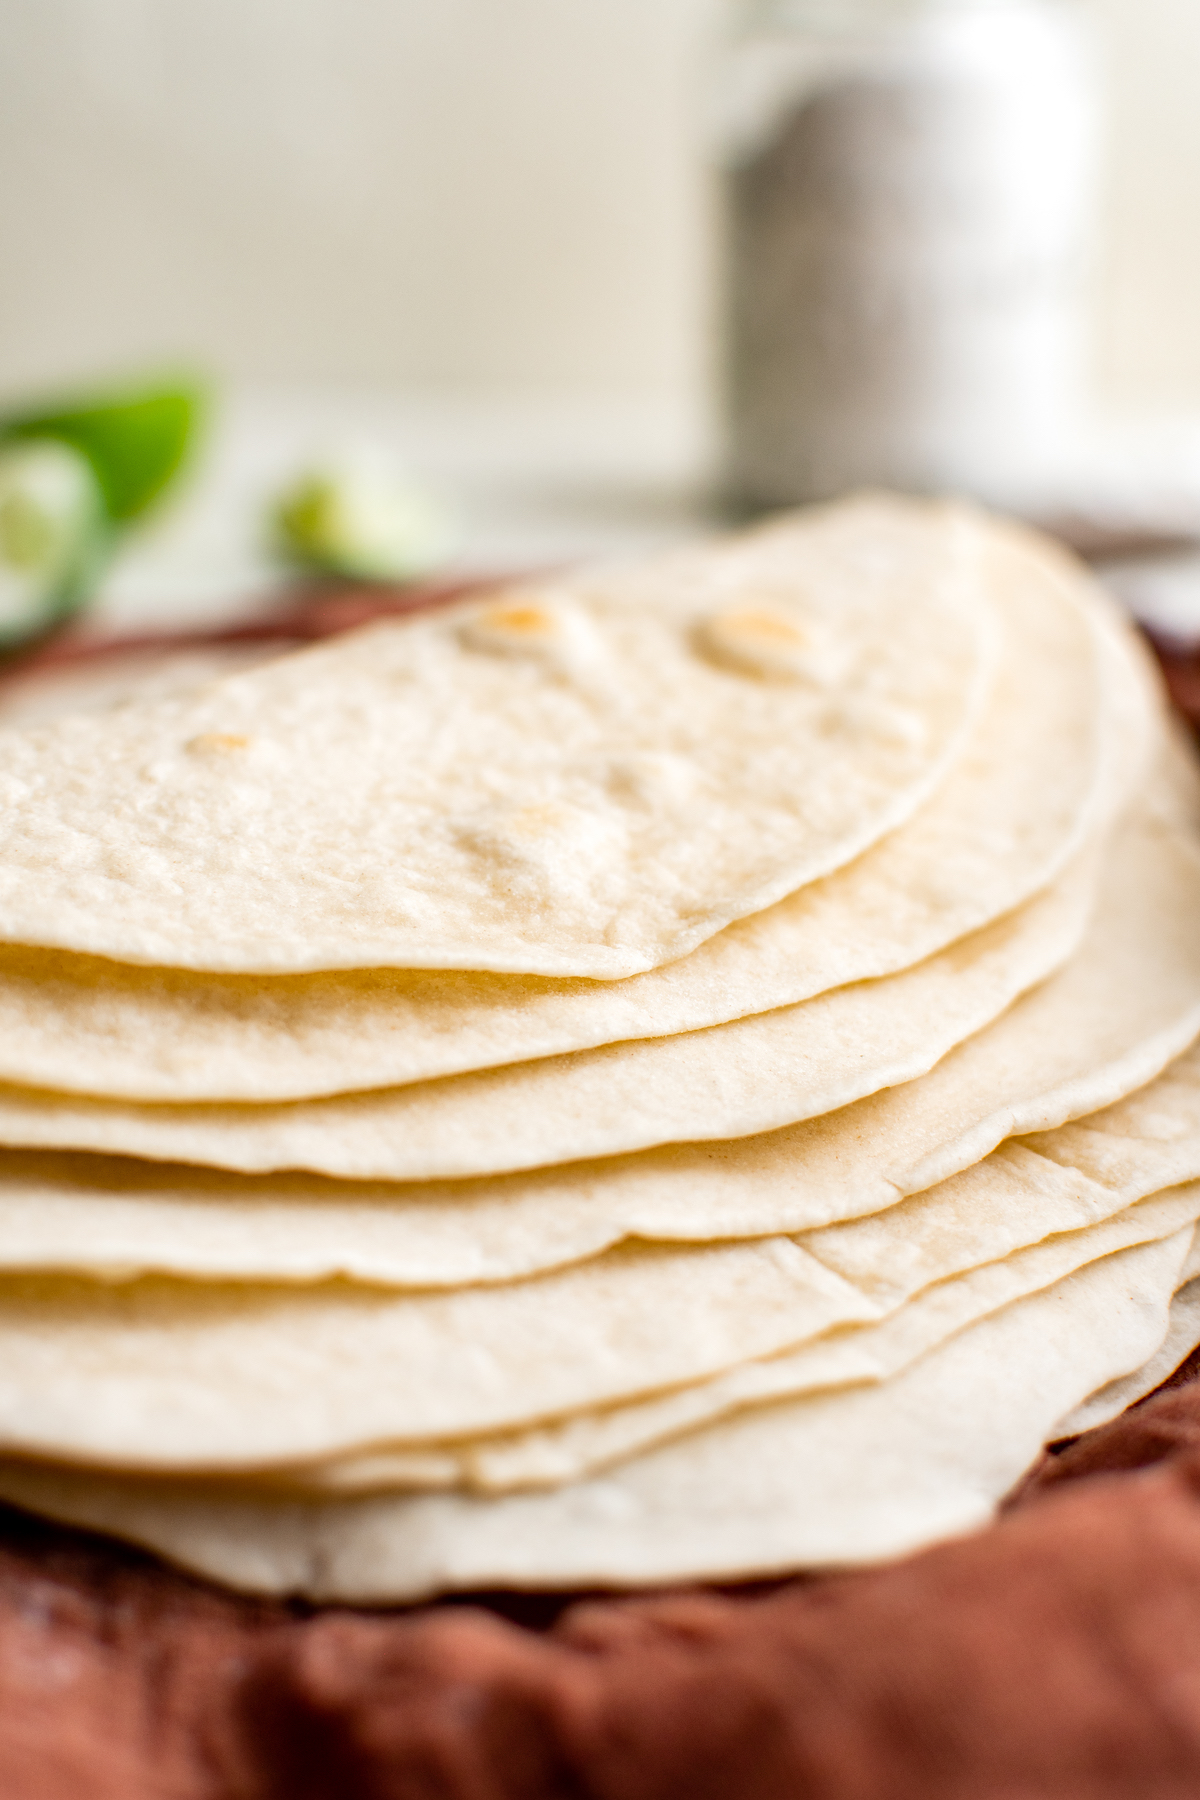 A close-up side view of flour tortillas fanned out on a napkin.